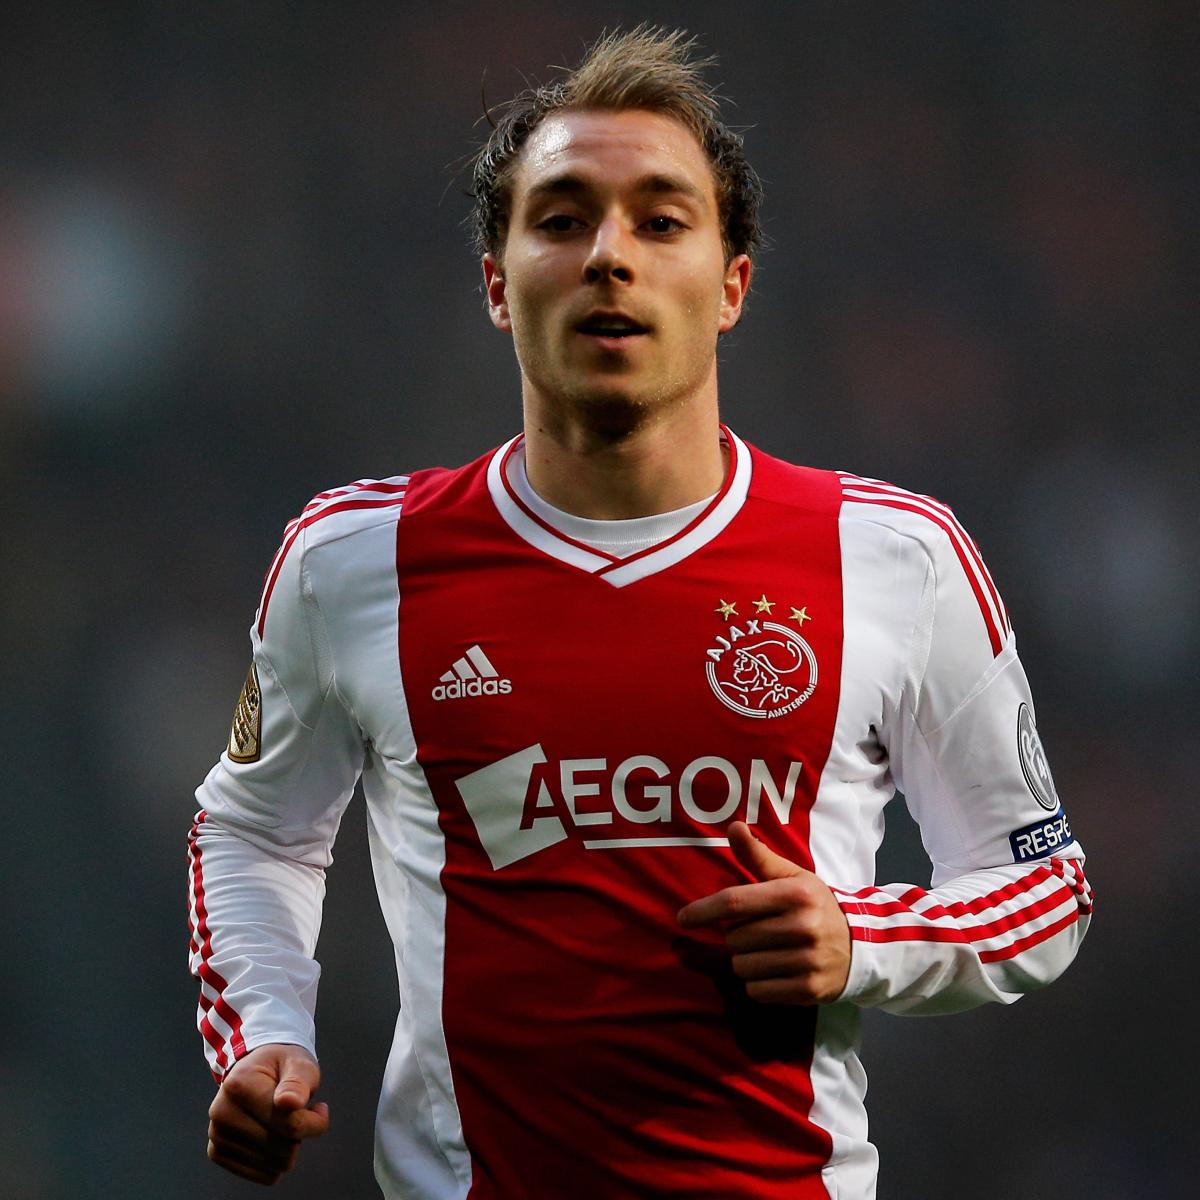 Tottenham Agree Deal To Sign Christian Eriksen From Ajax For Measly £8m